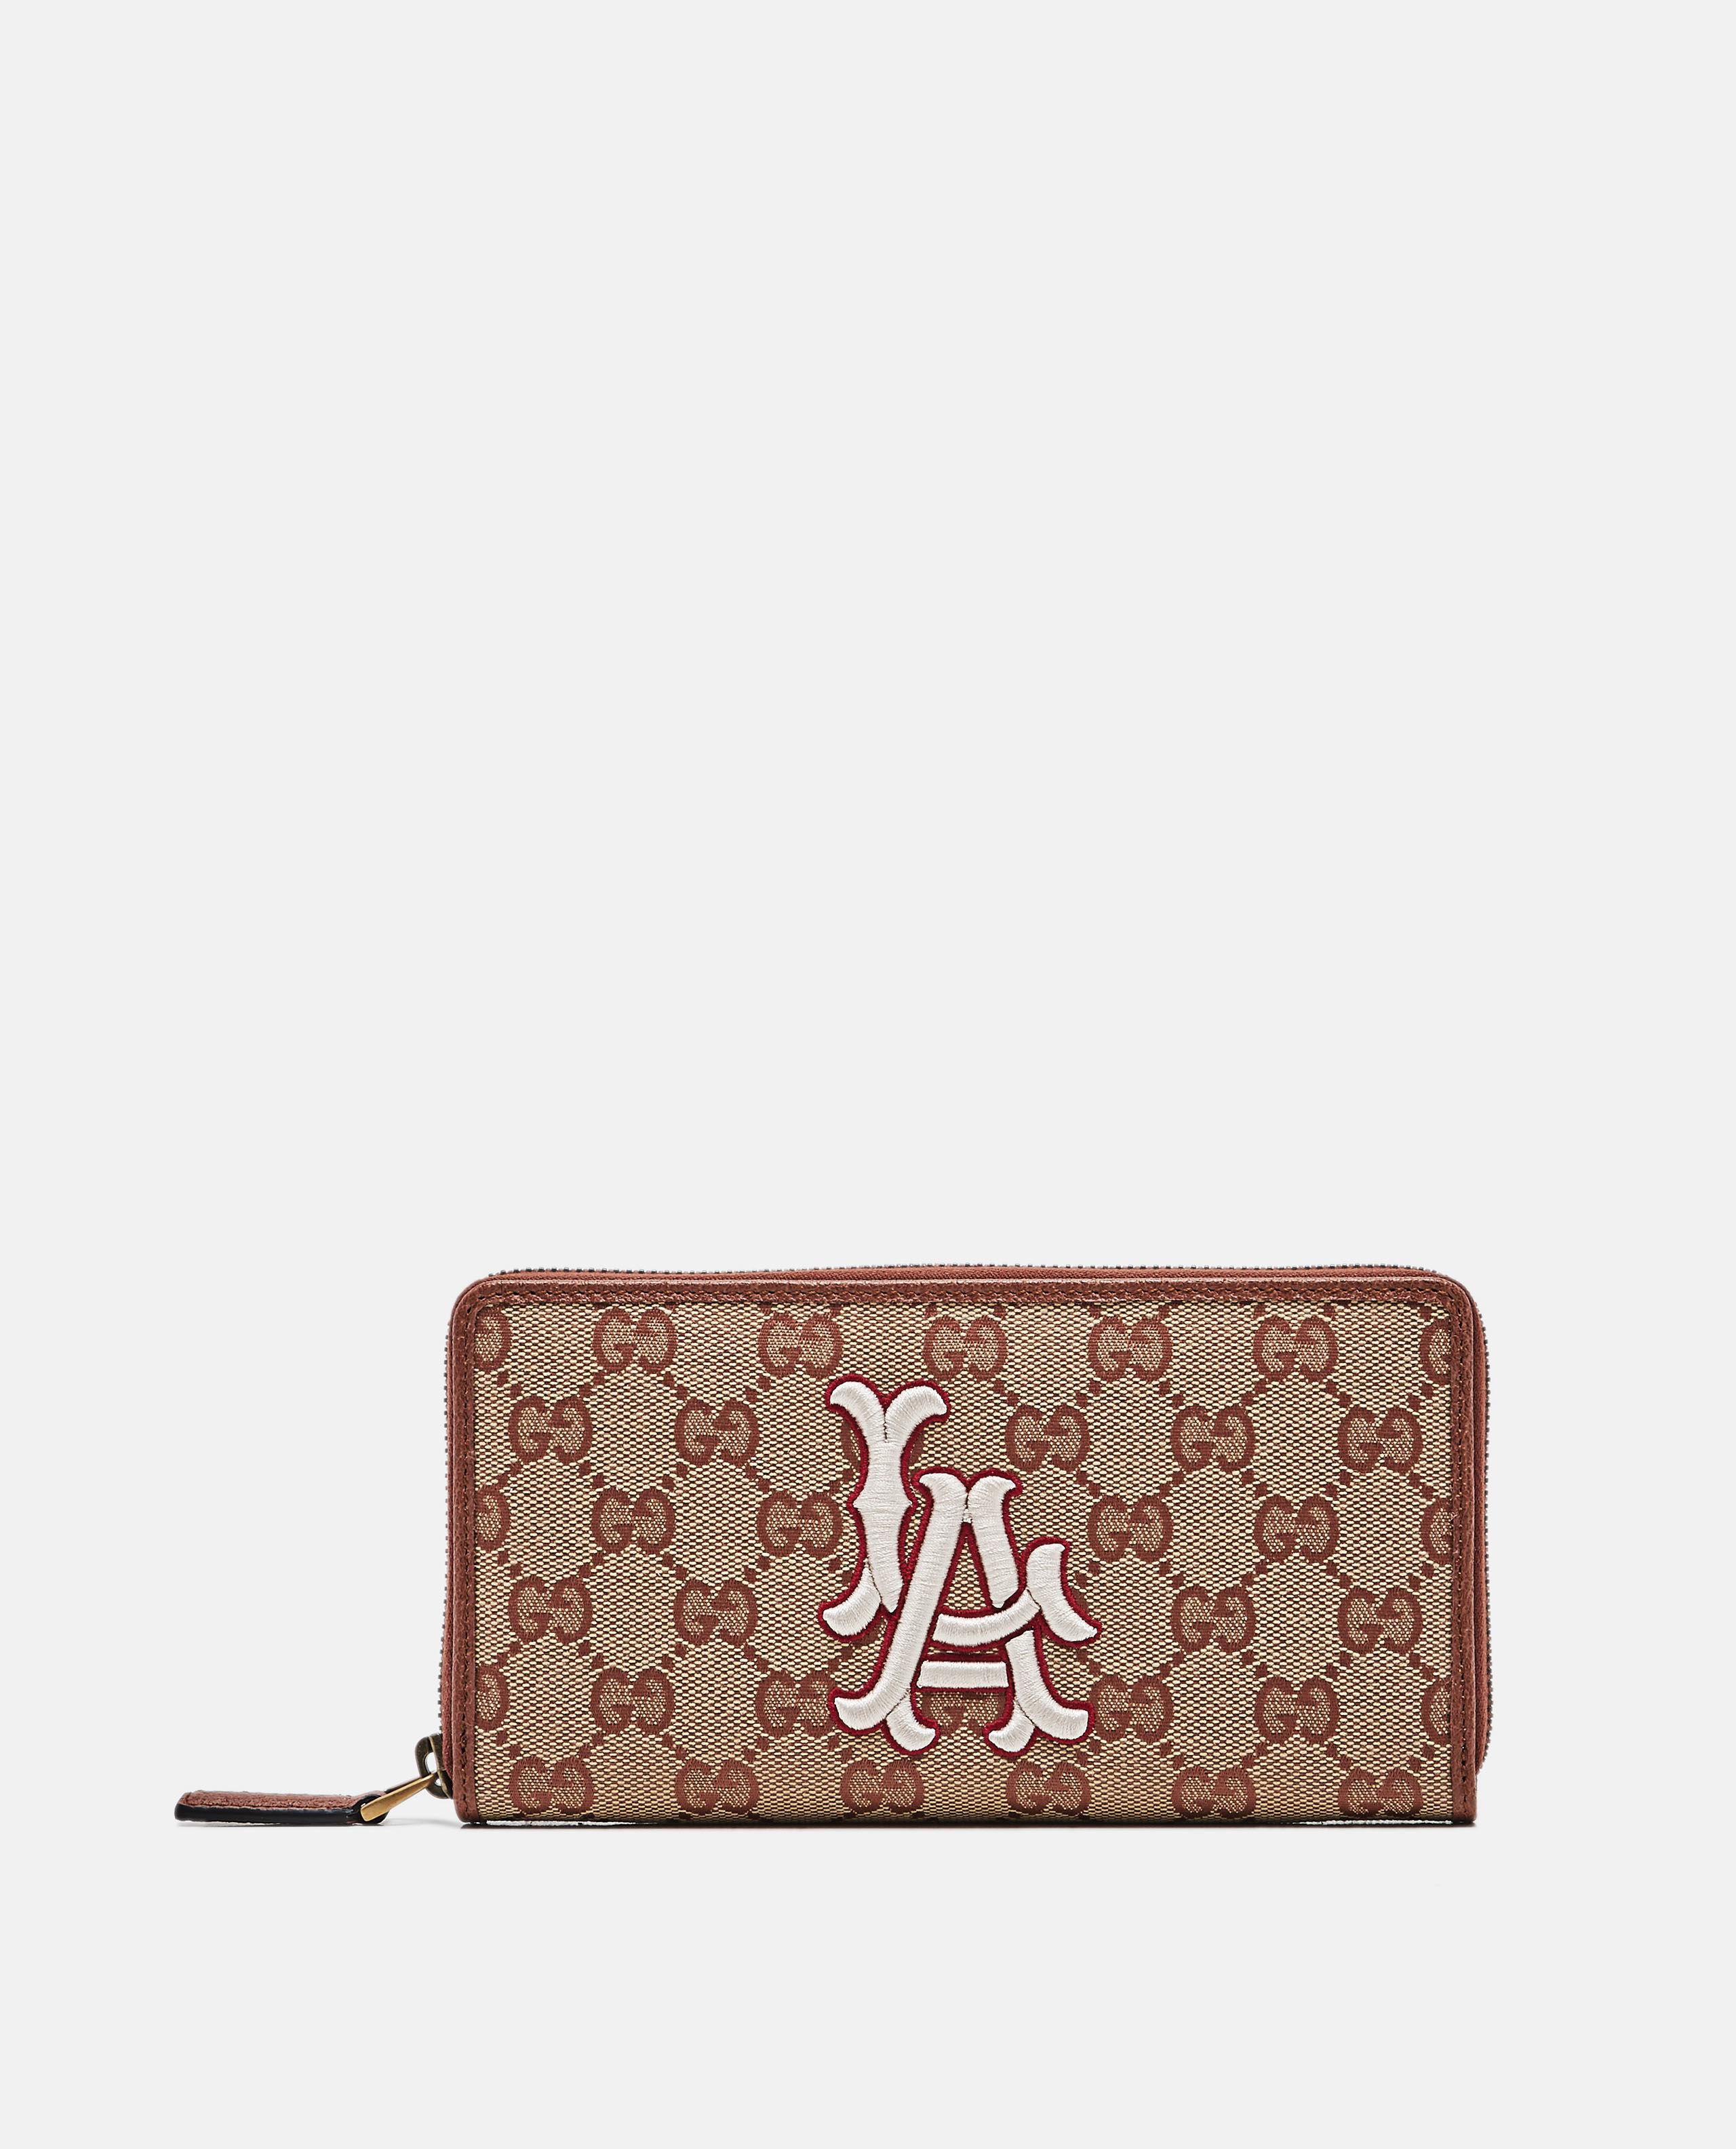 Gucci Canvas Original Gg Zip Around Wallet With La Angels Patch in Brown for Men - Lyst